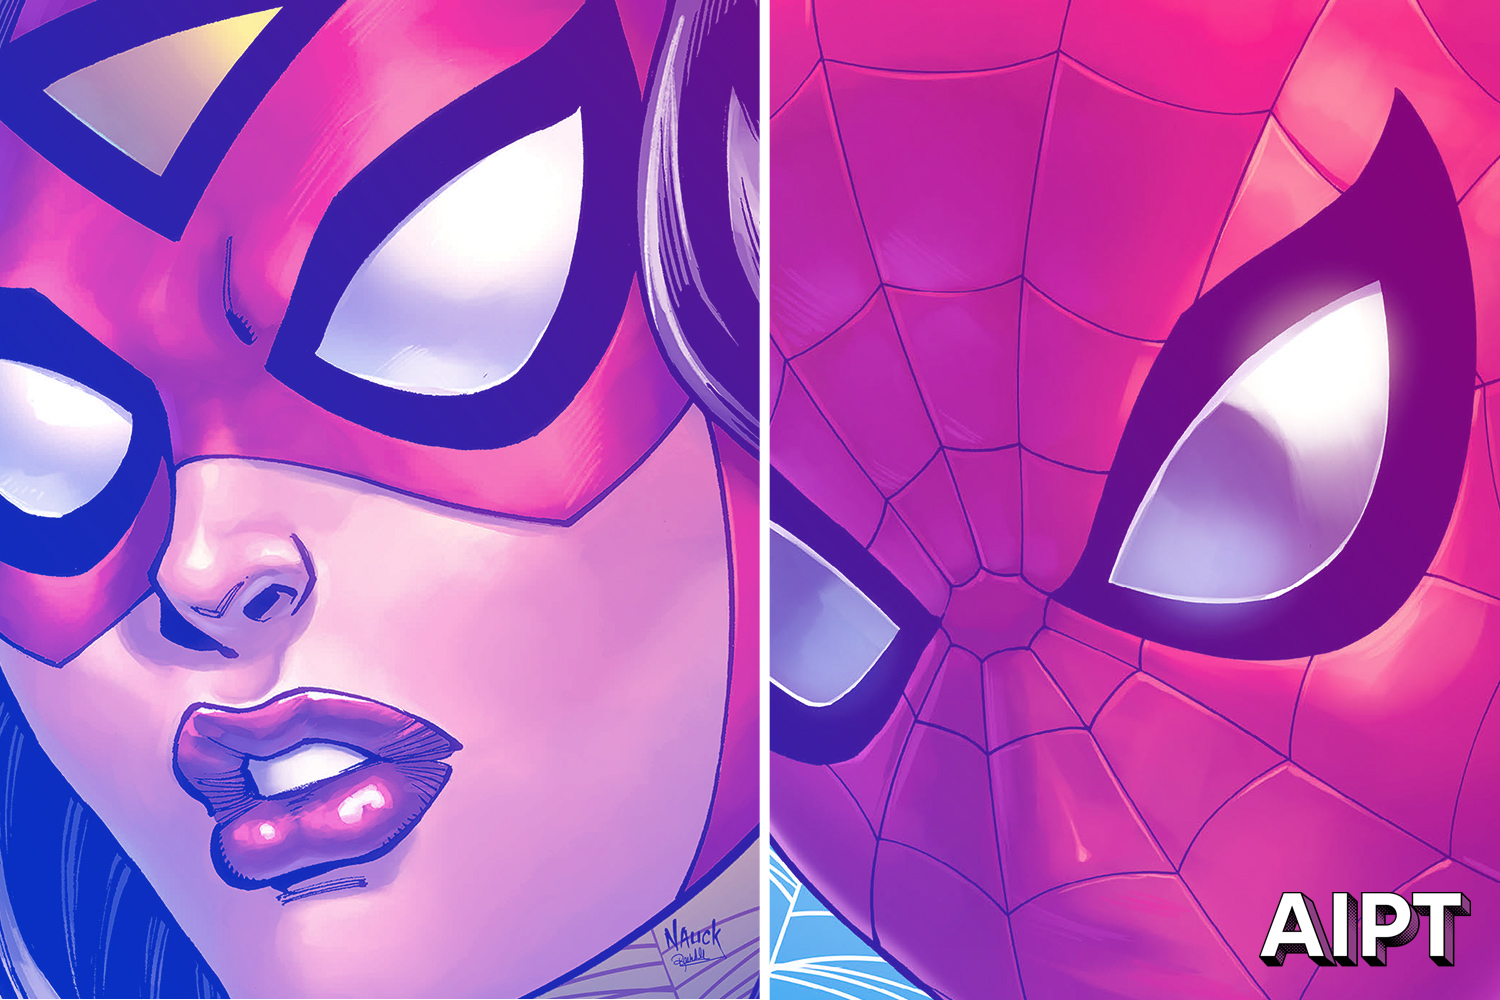 Marvel Comics reveals November headshot covers by the illustrious Todd Nauck